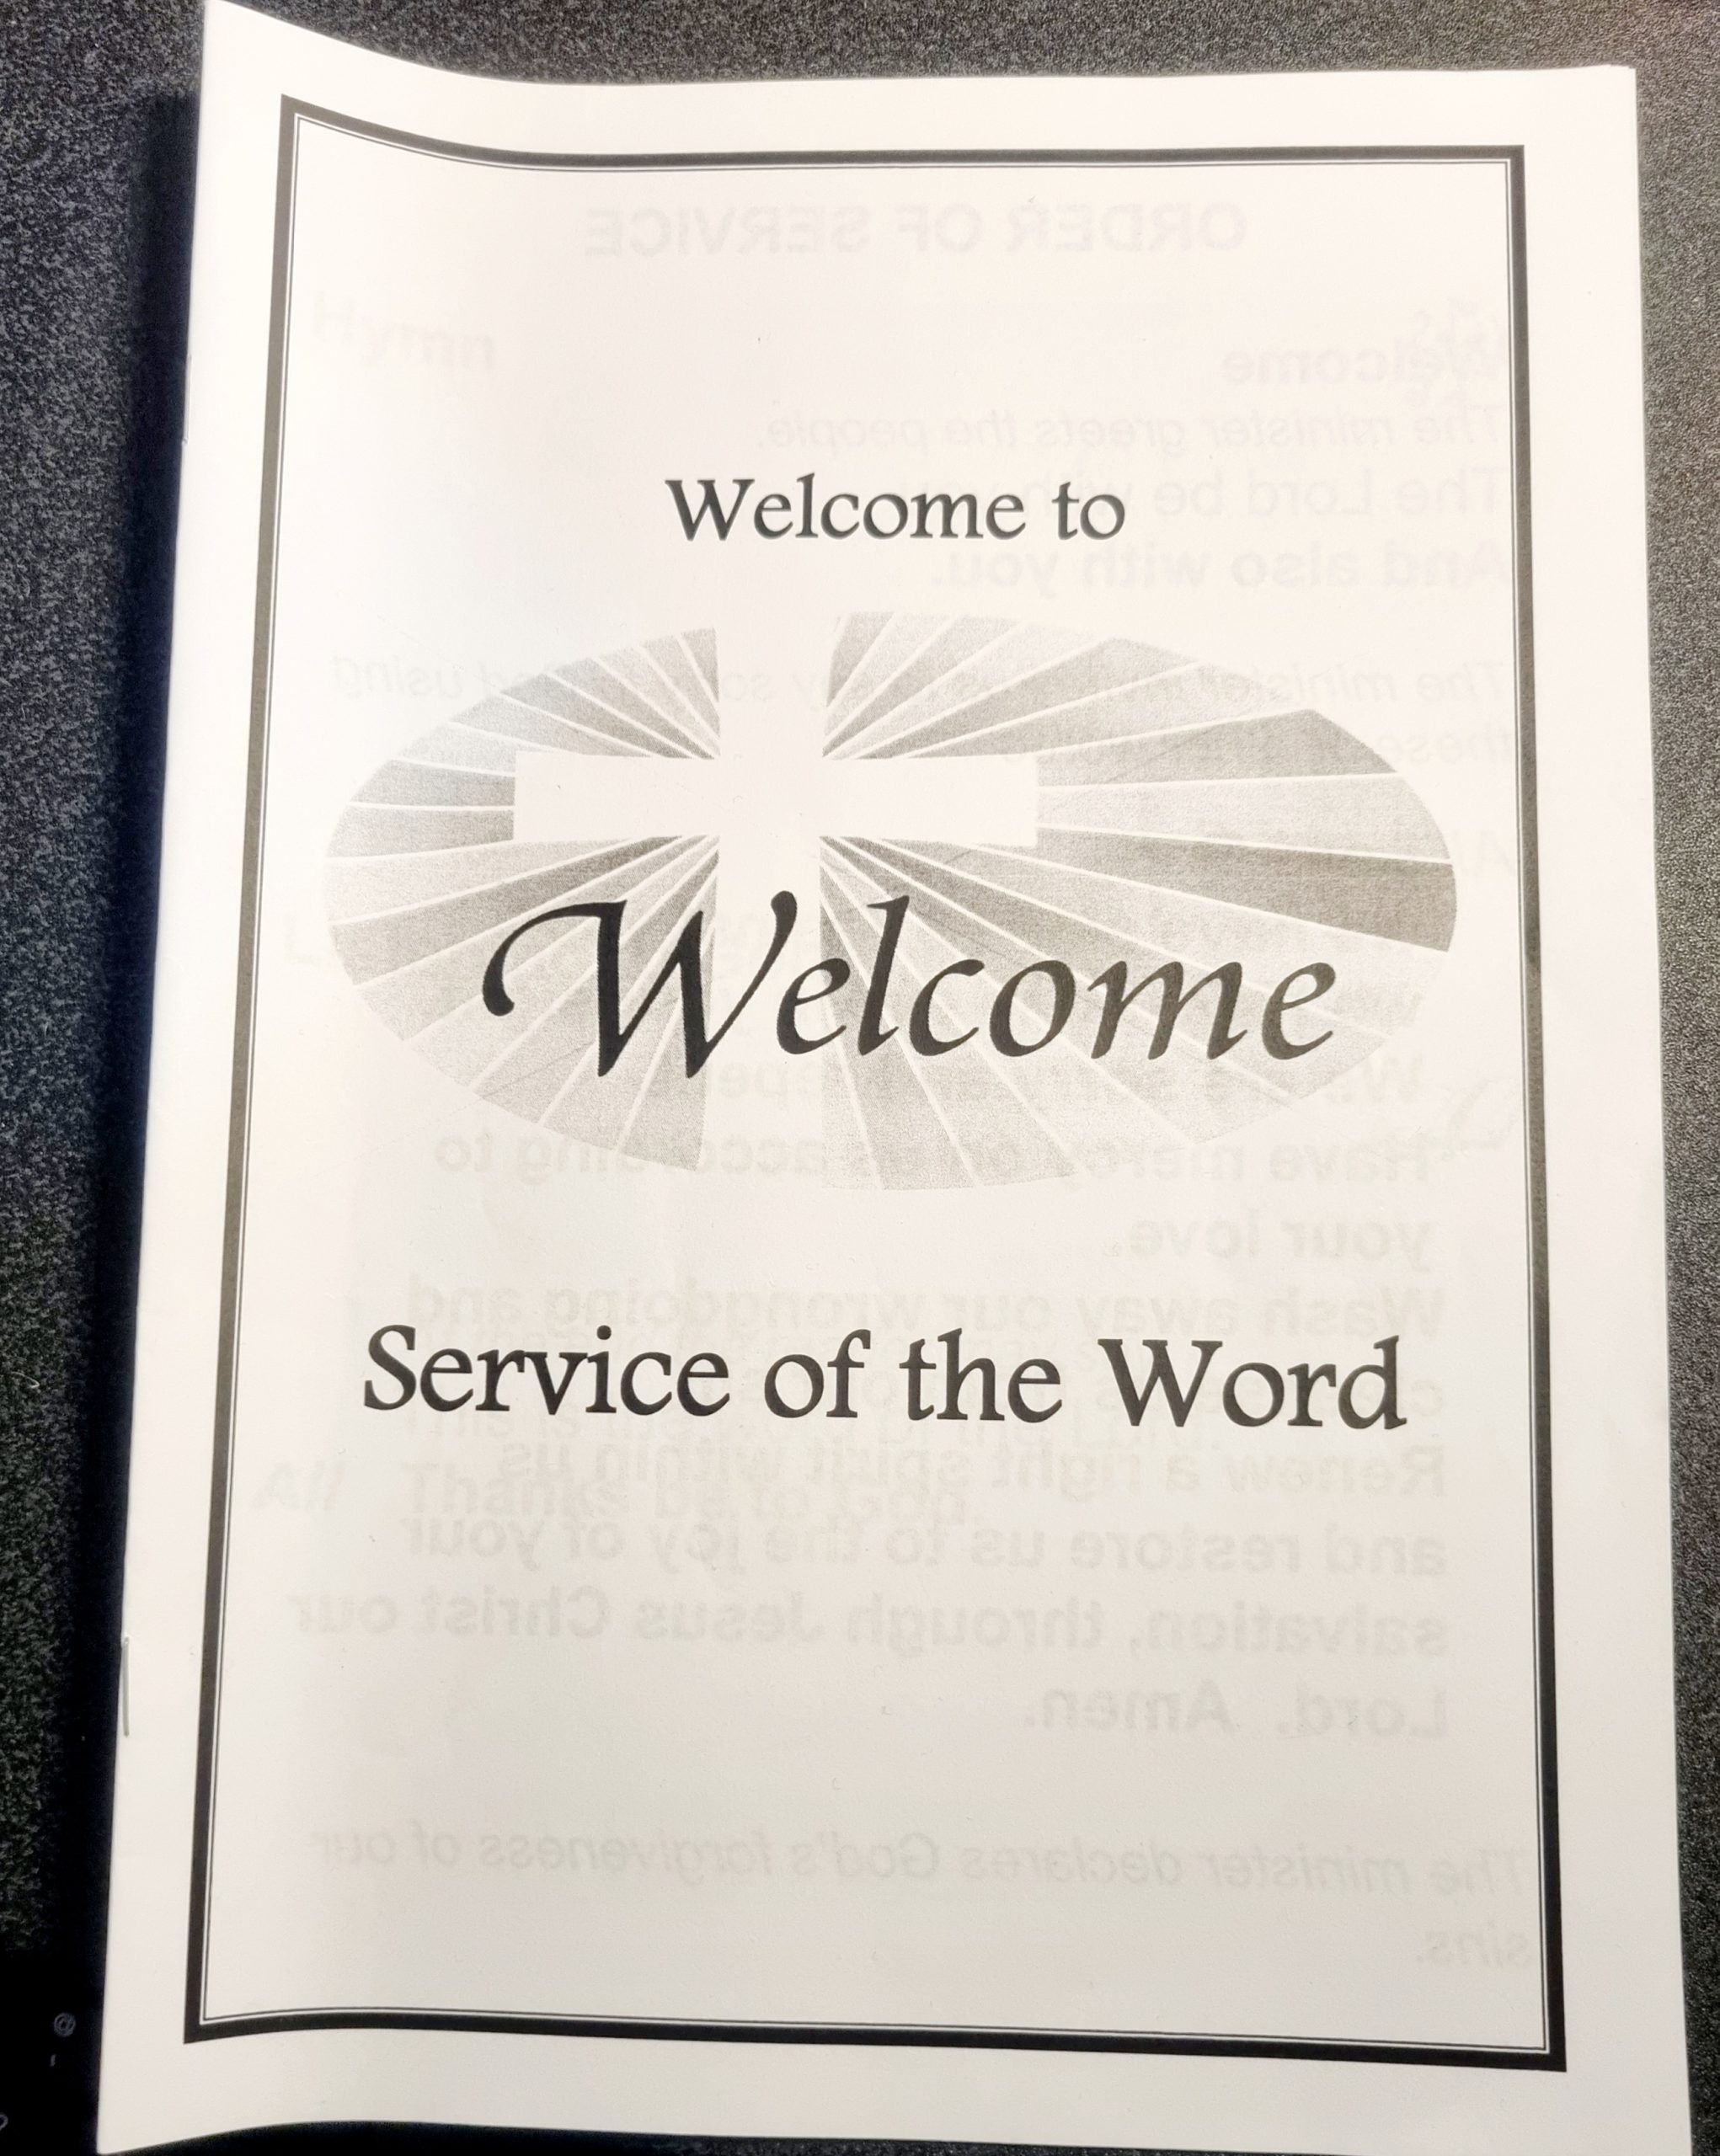 Nico's large print order of service